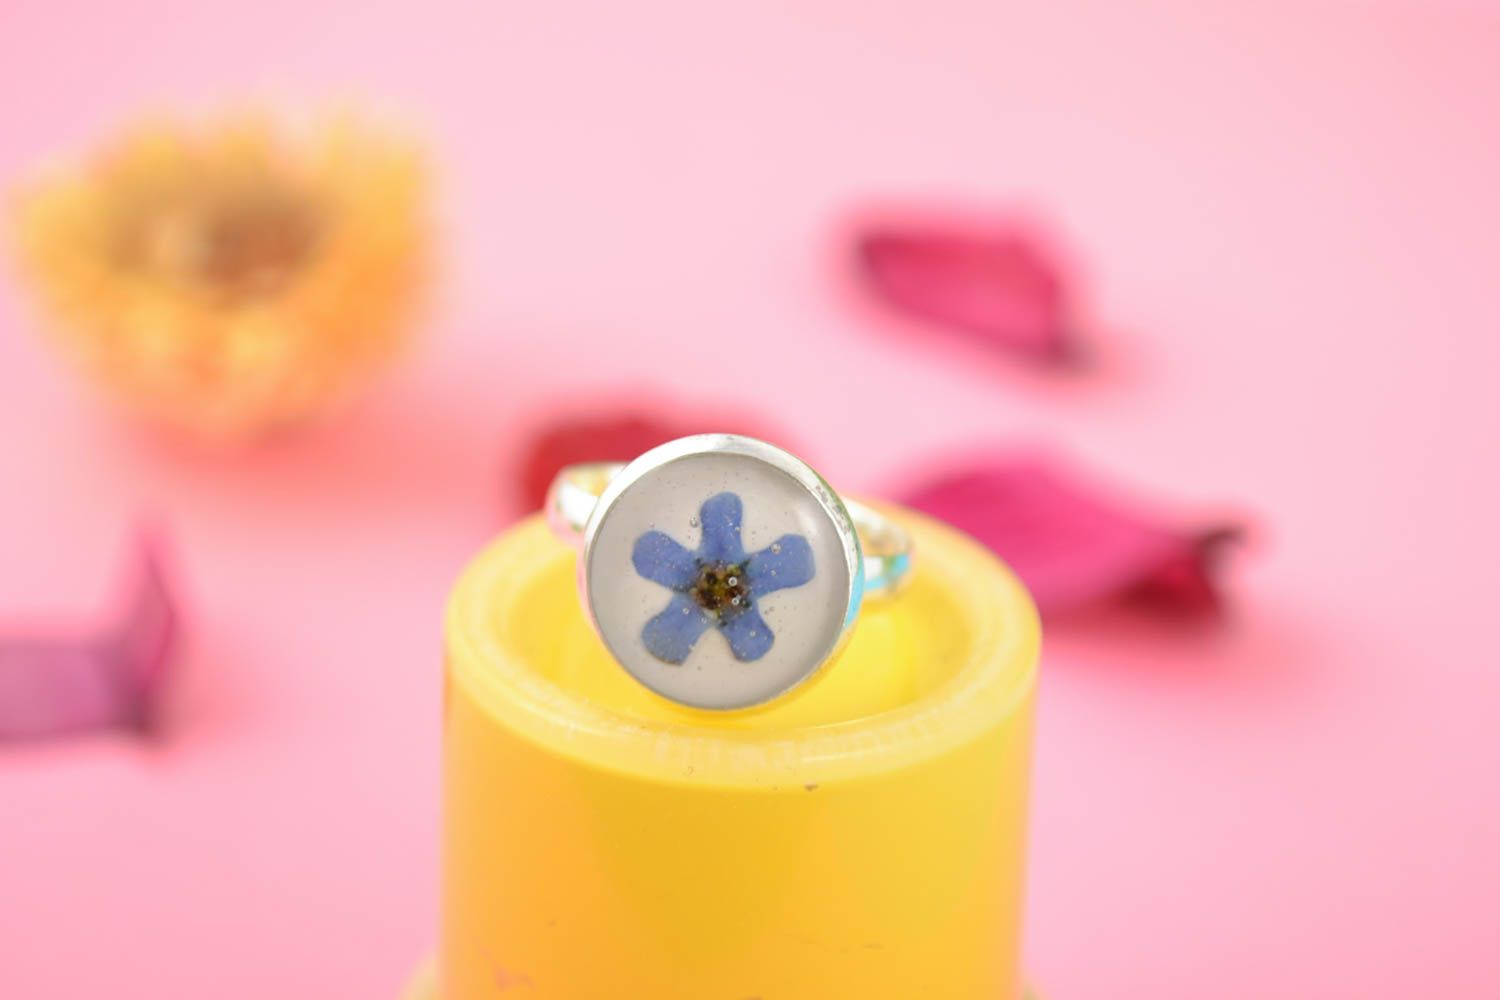 Handmade tender neat metal jewelry ring with blue flower in epoxy resin photo 1